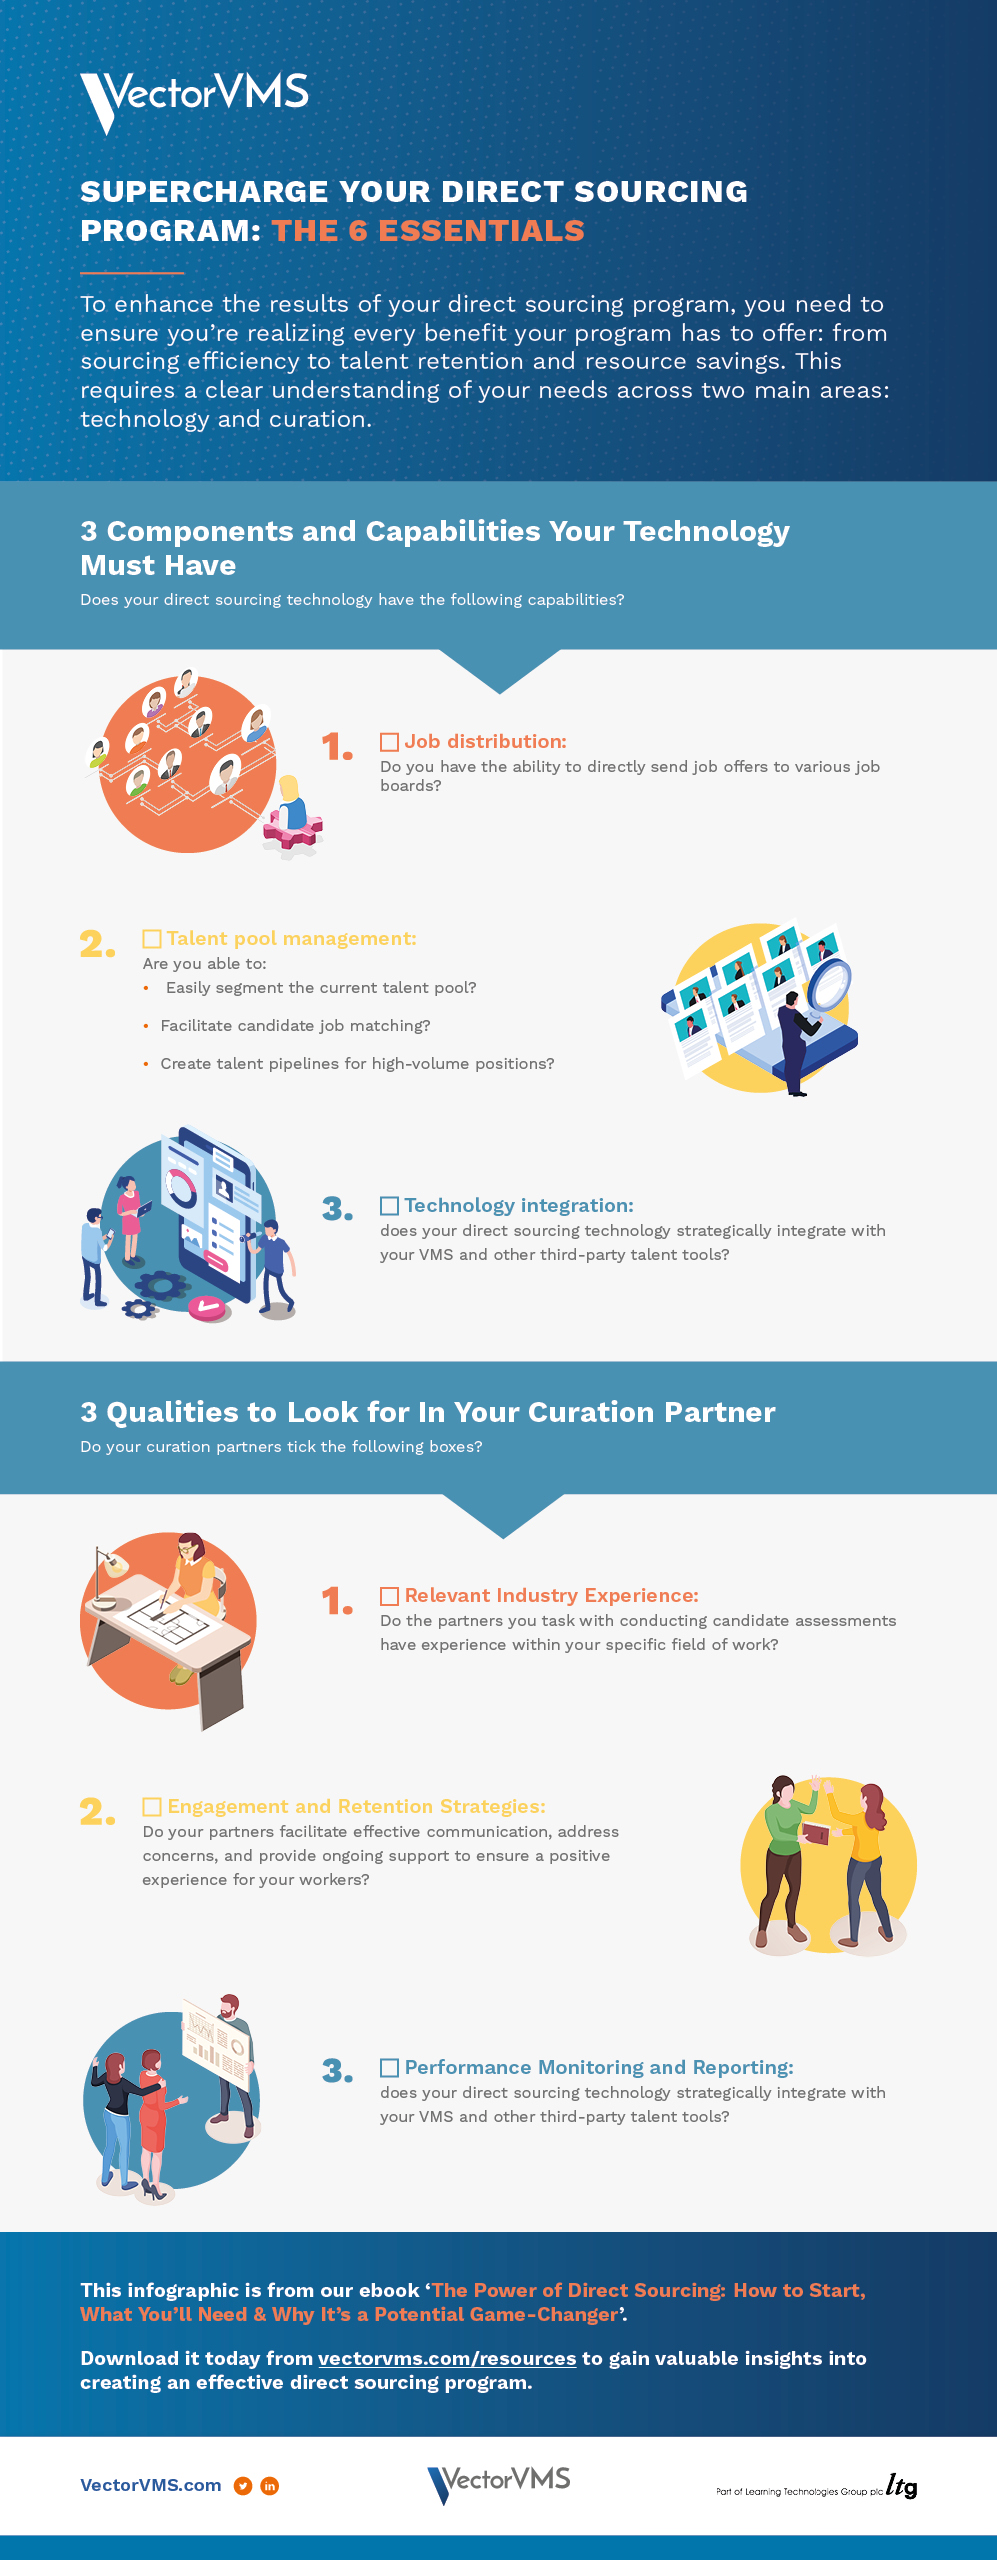 A VectorVMS infographic on Supercharge Your Direct Sourcing Program: The 6 Essentials